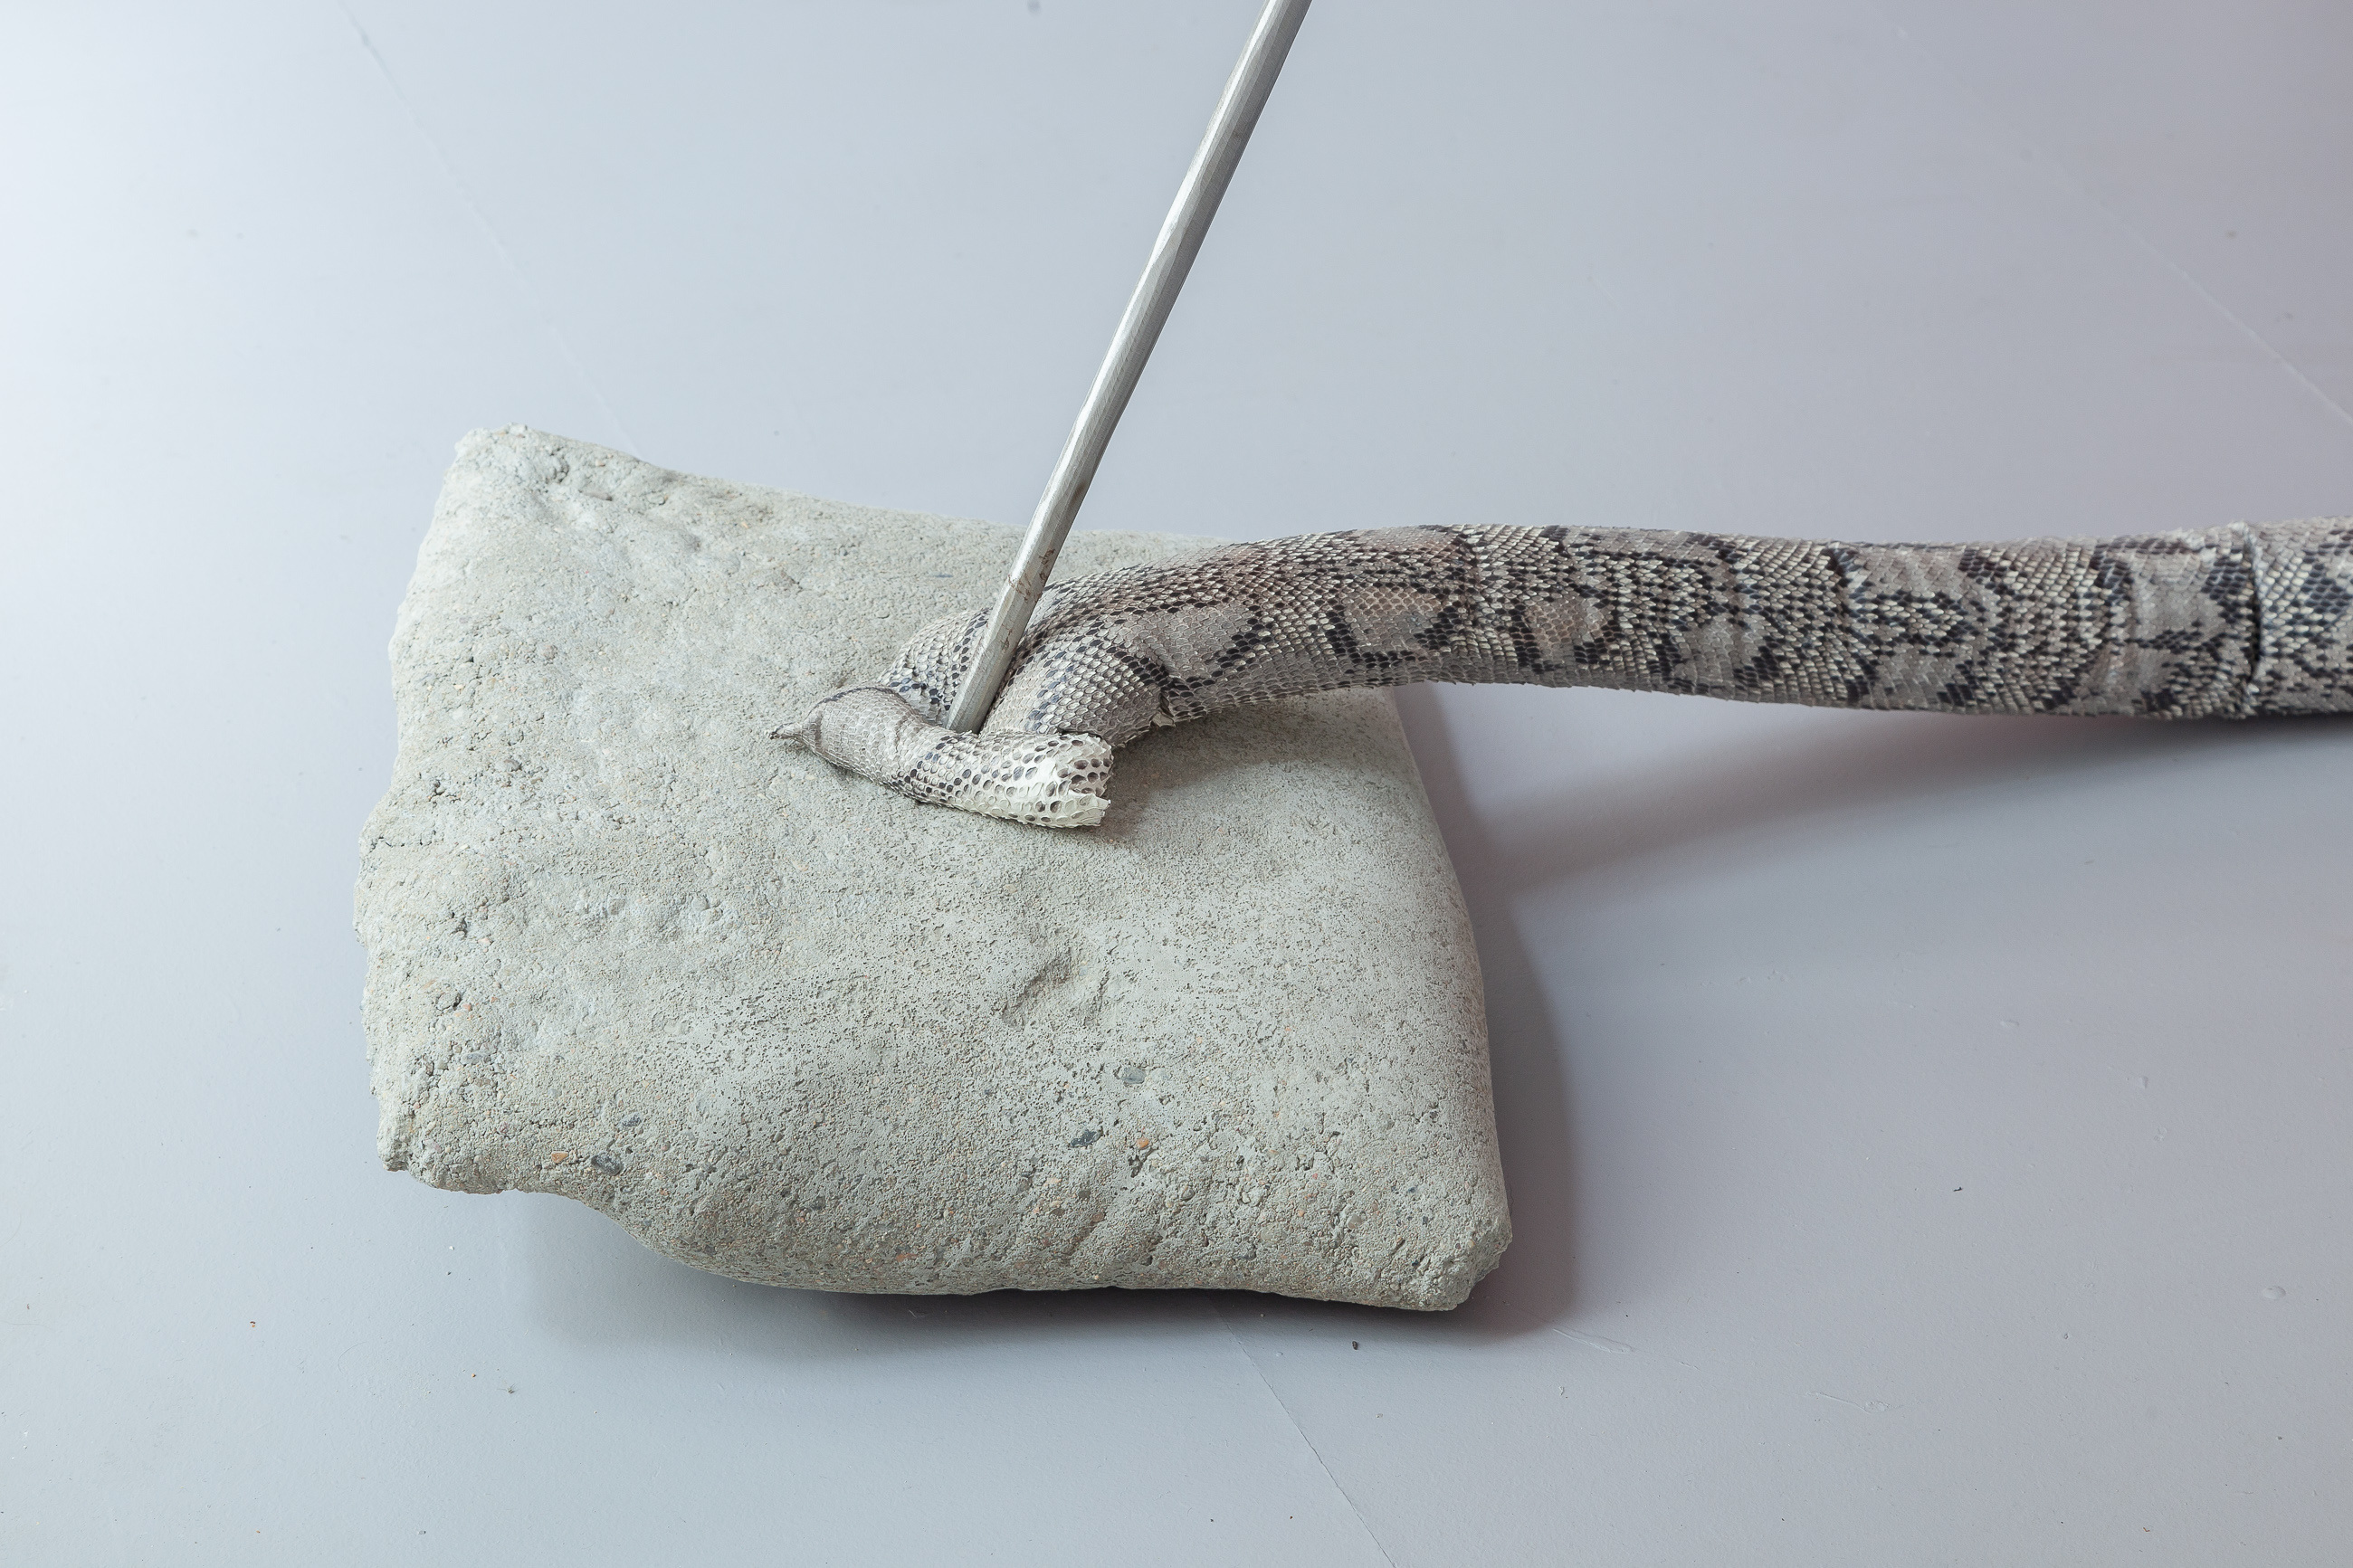 14 NicolÃ¡s Astorga, POSSIBLE ENEMIES, upcycled reassembled python skin, steel, concrete snake 3.5 mt / arrow 1.5 mt / pillow, 40 x 40 x 10 cm, 2021 (detail 01)